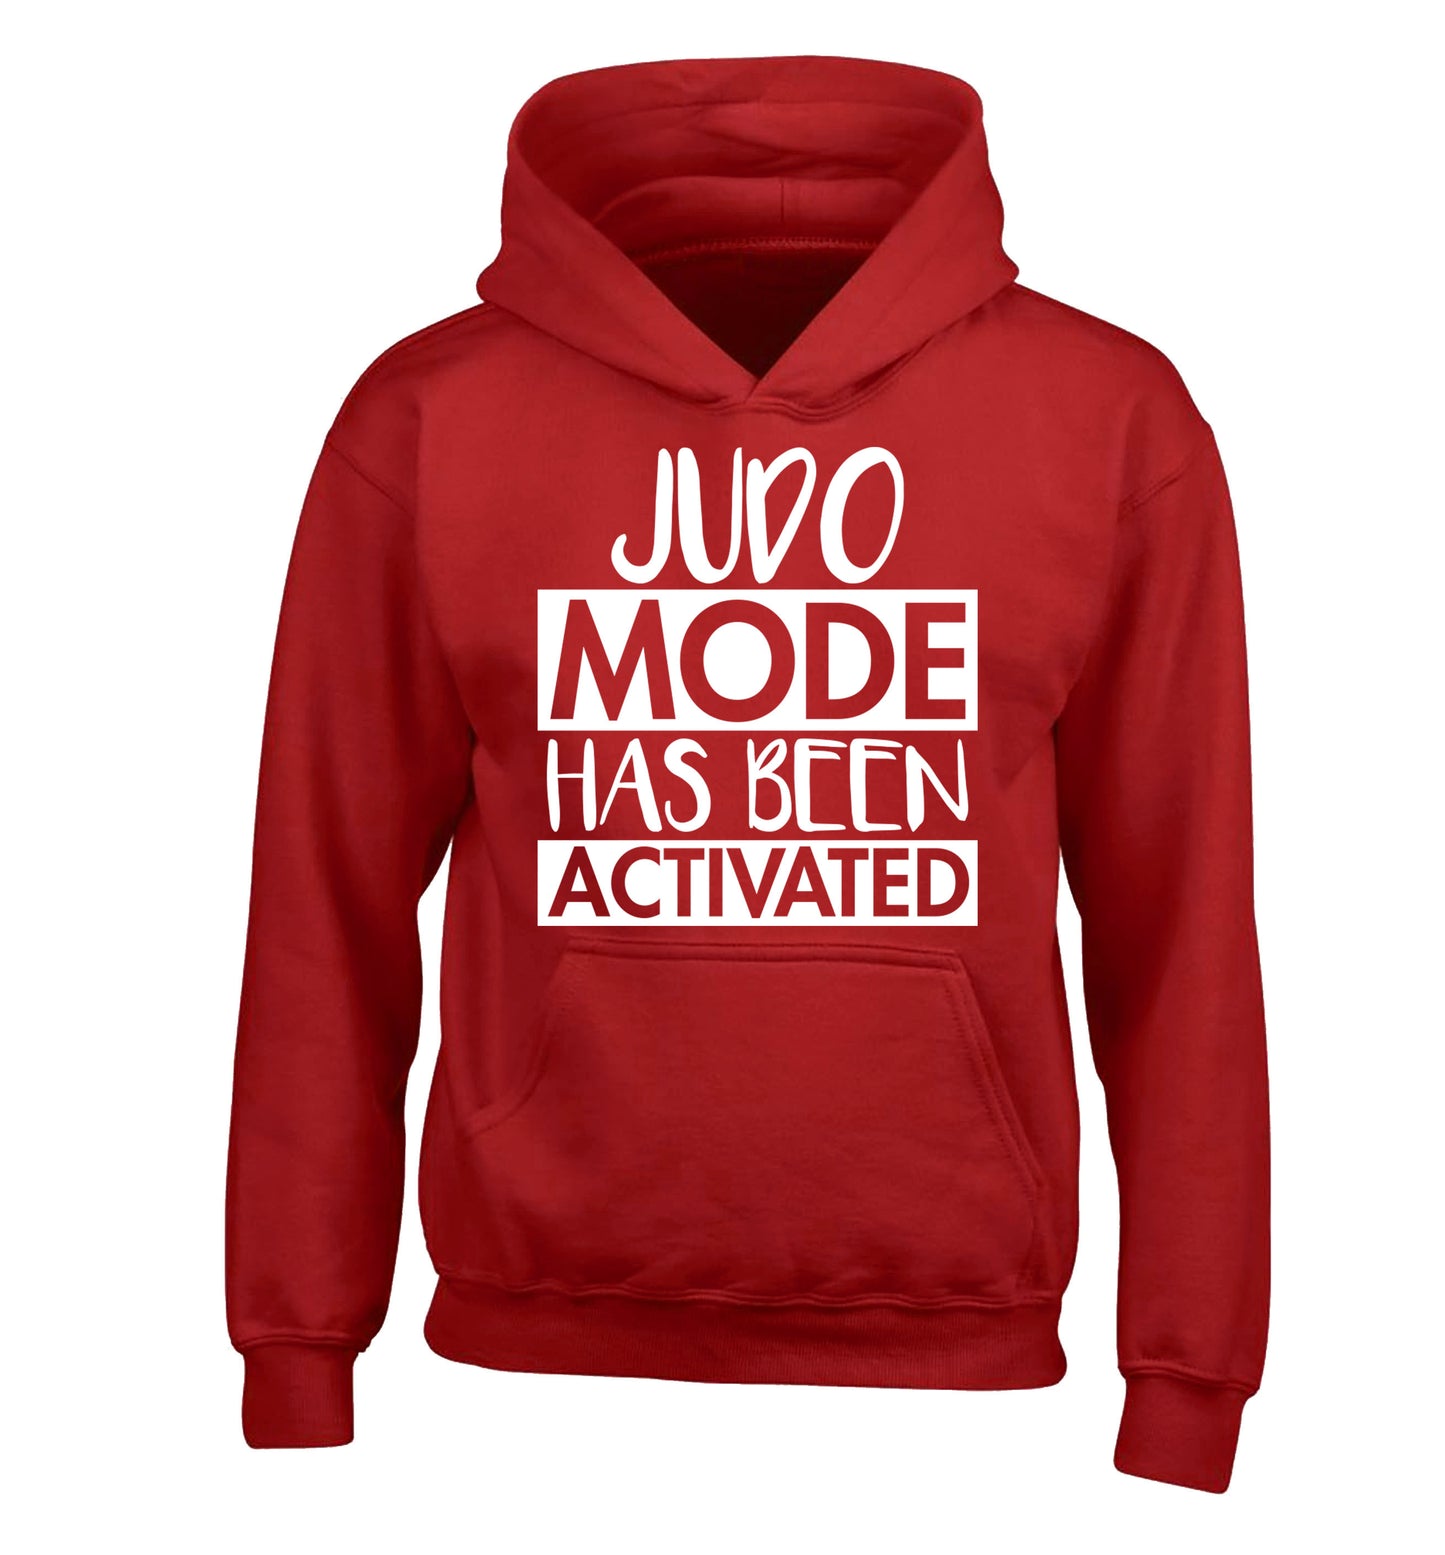 Judo mode activated children's red hoodie 12-14 Years